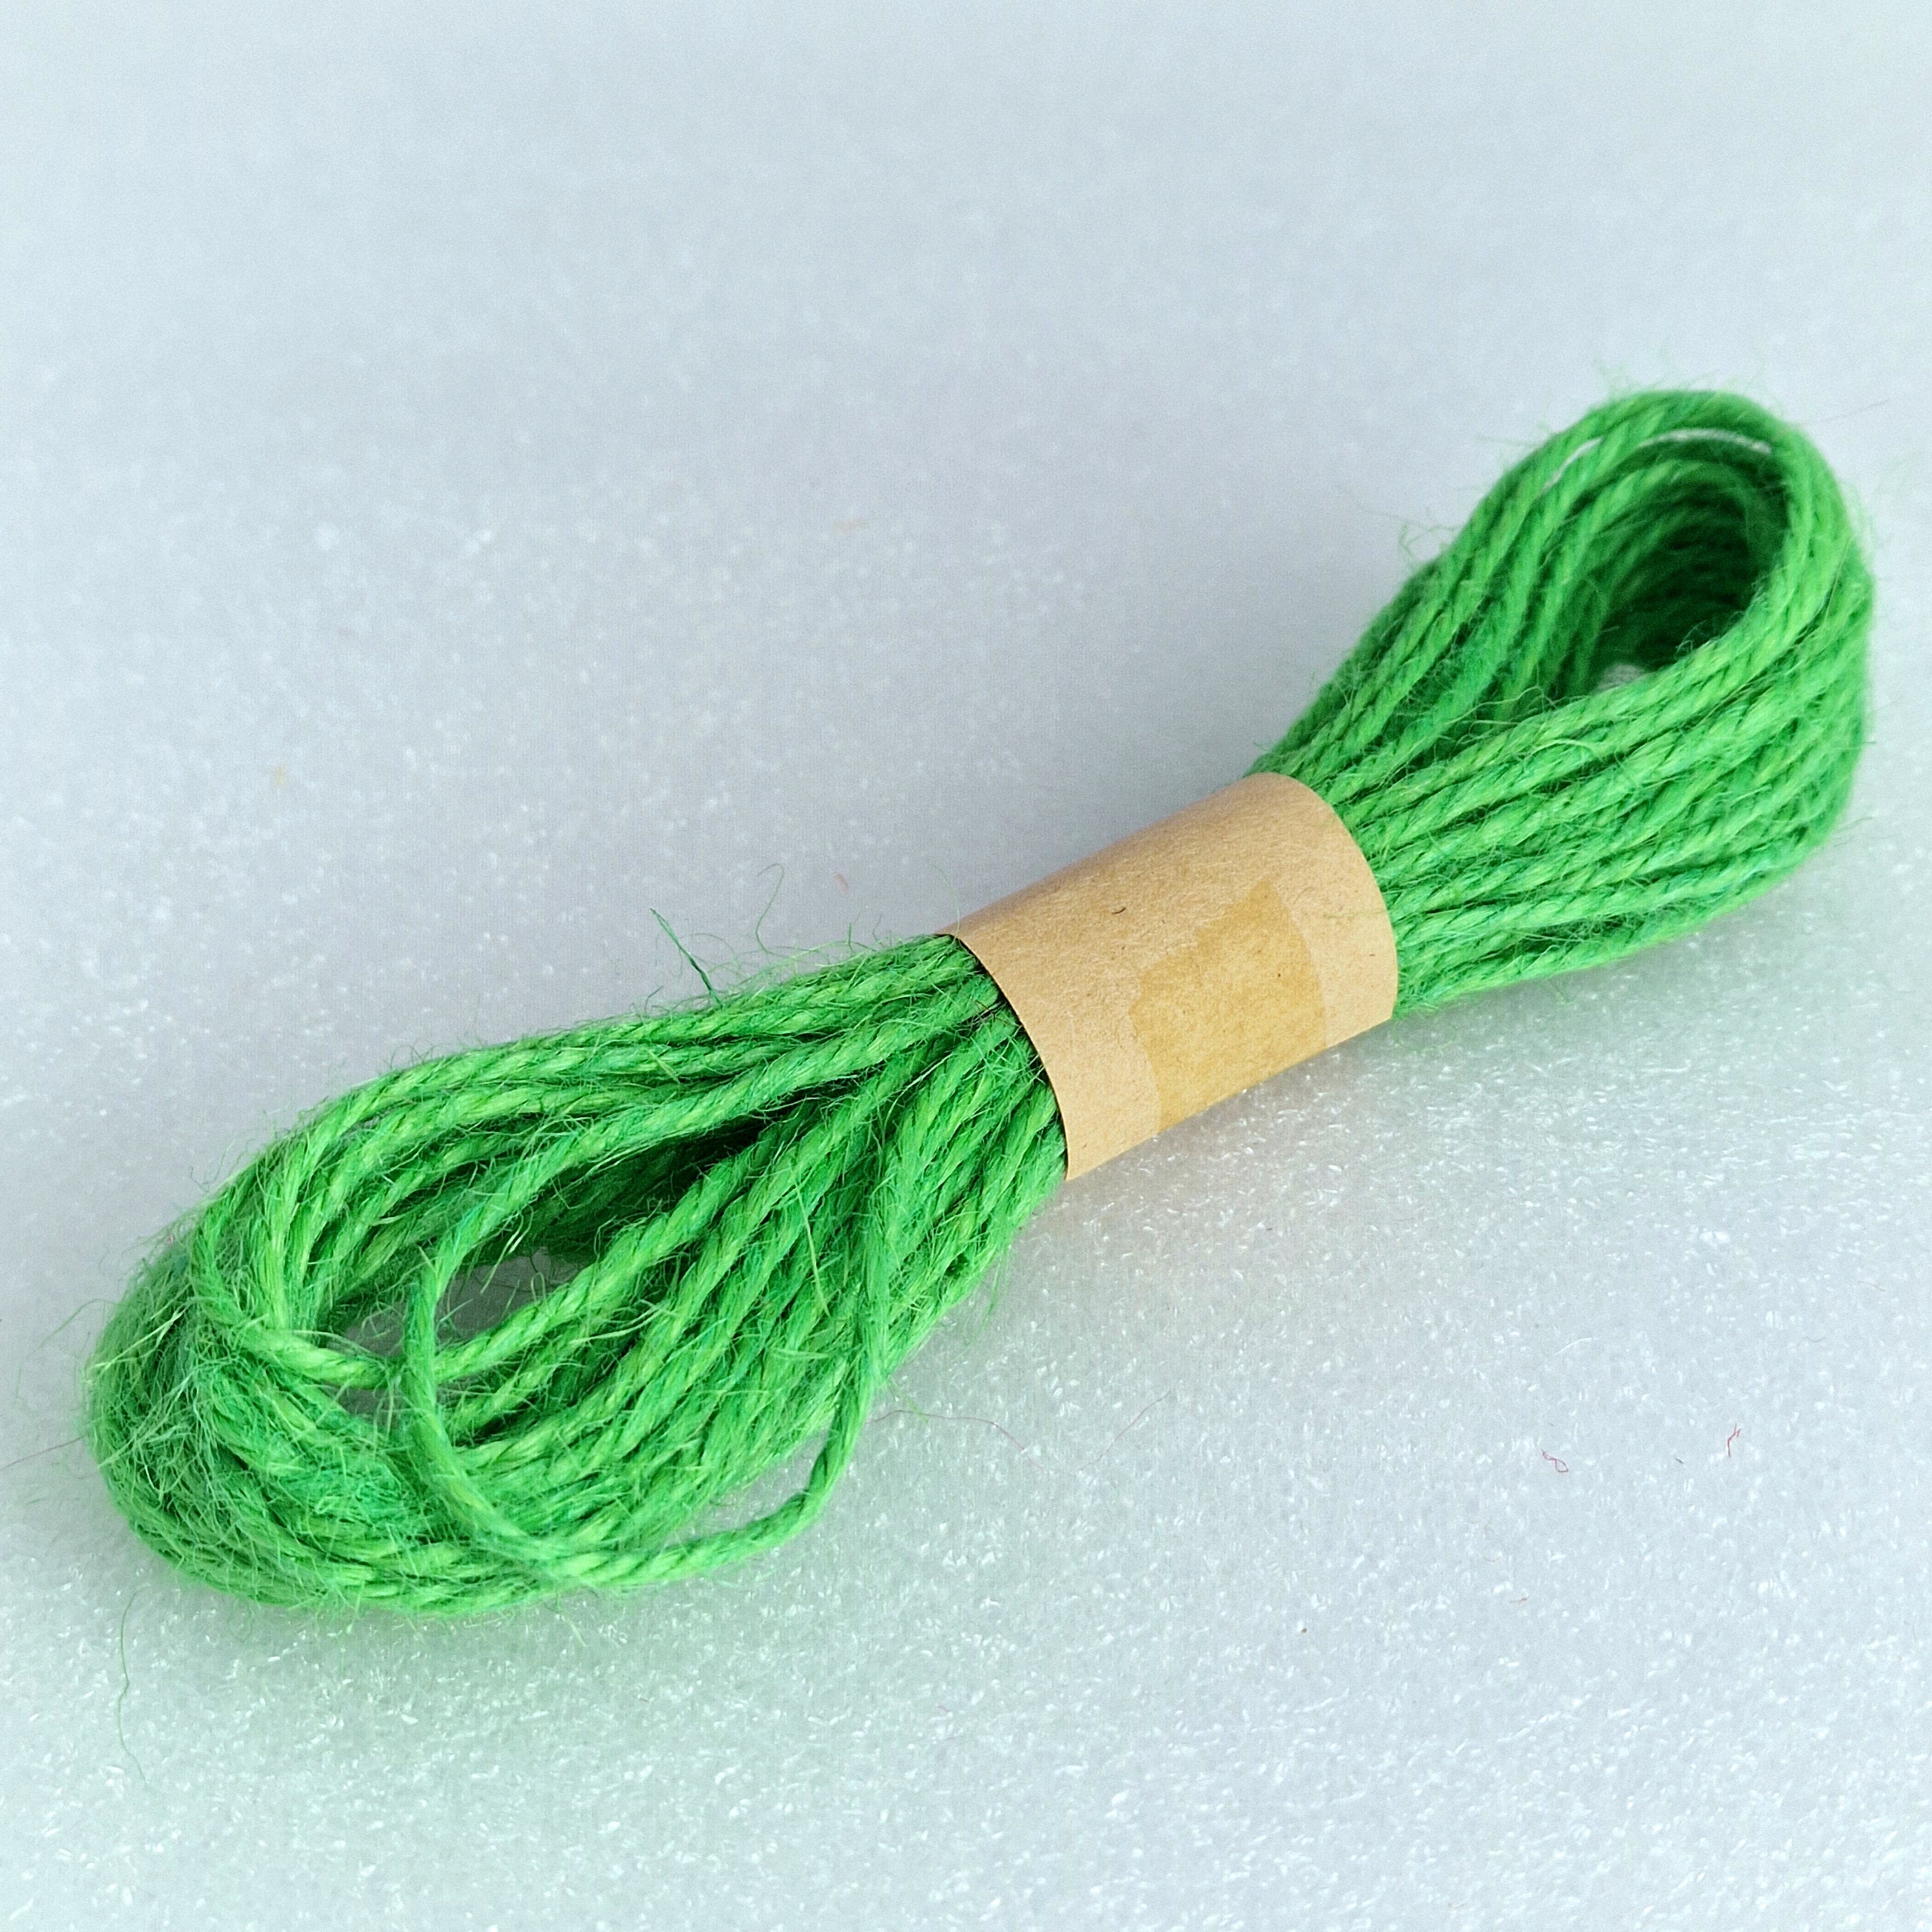 MajorCrafts 10metres 1mm thick Bright Green Jute Twine String